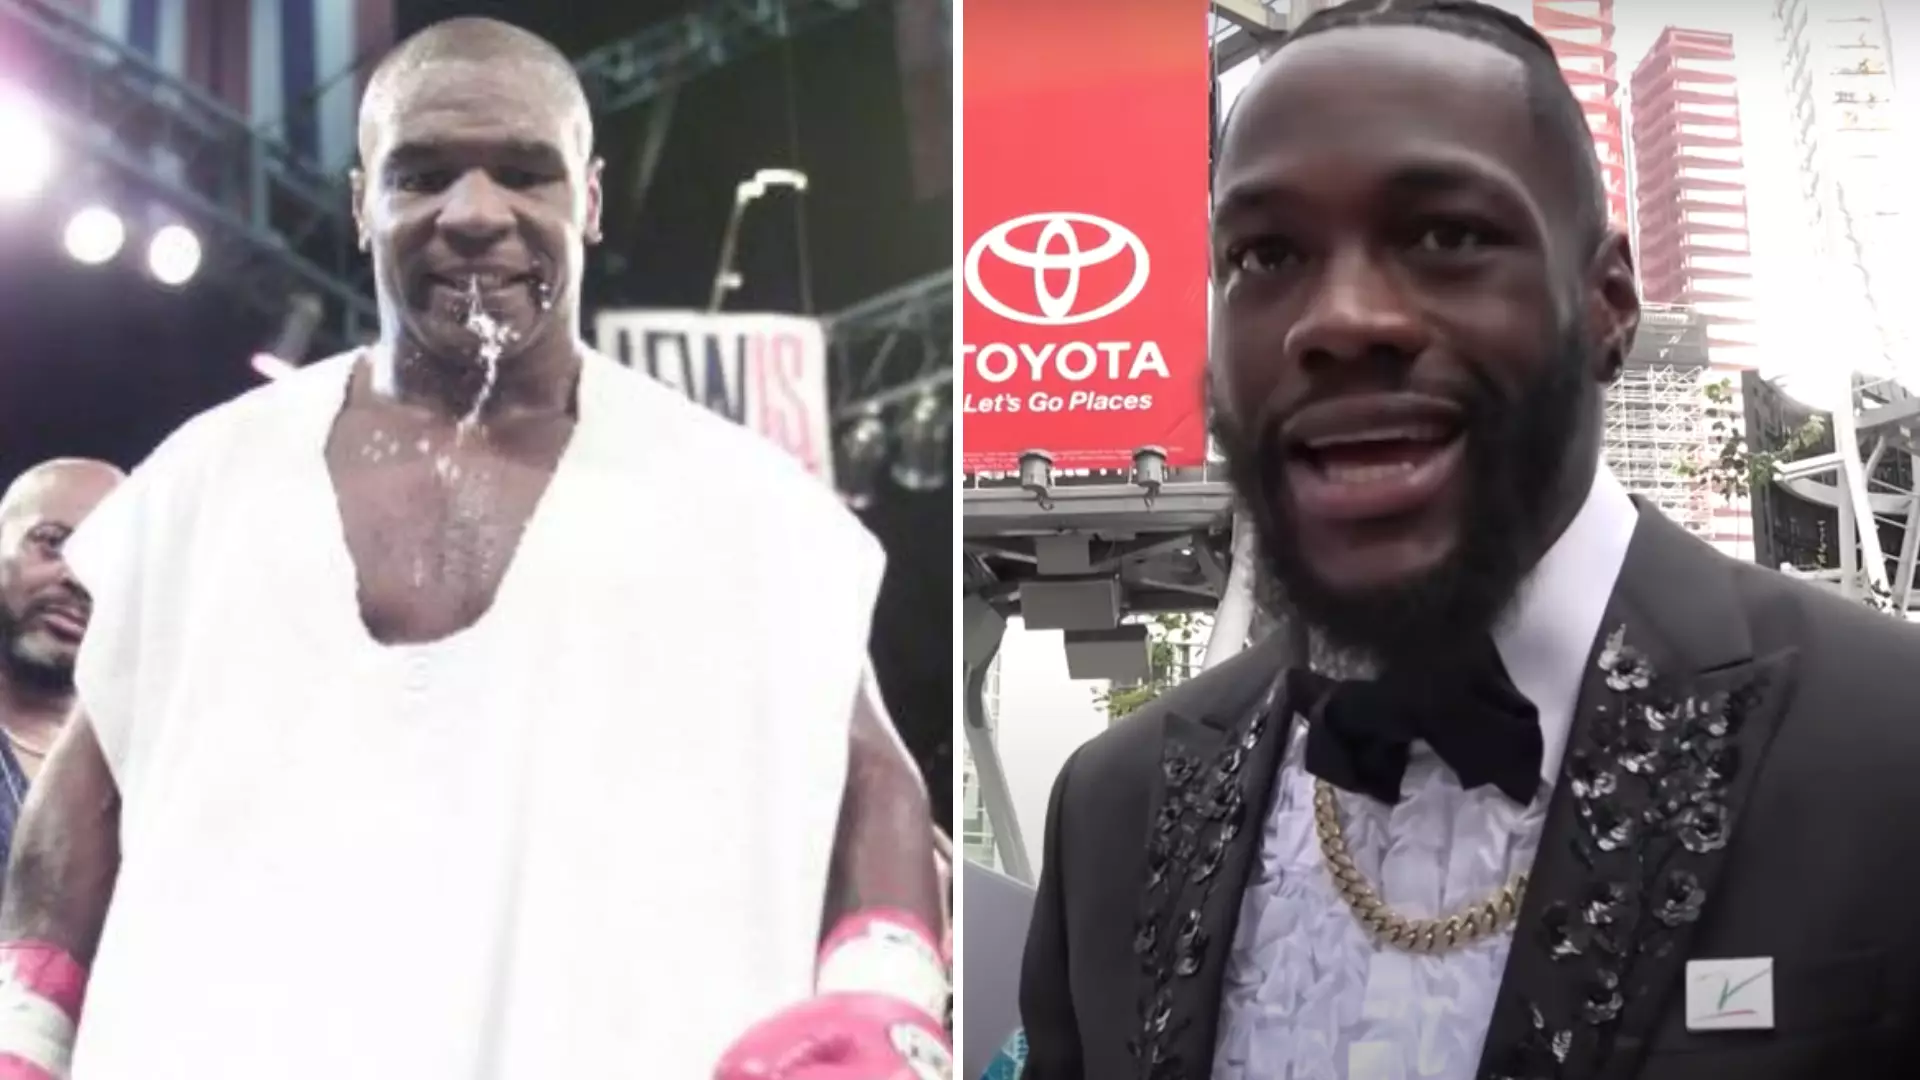 Deontay Wilder's Classy Response To Reporter Backing Him In A Fight With Mike Tyson